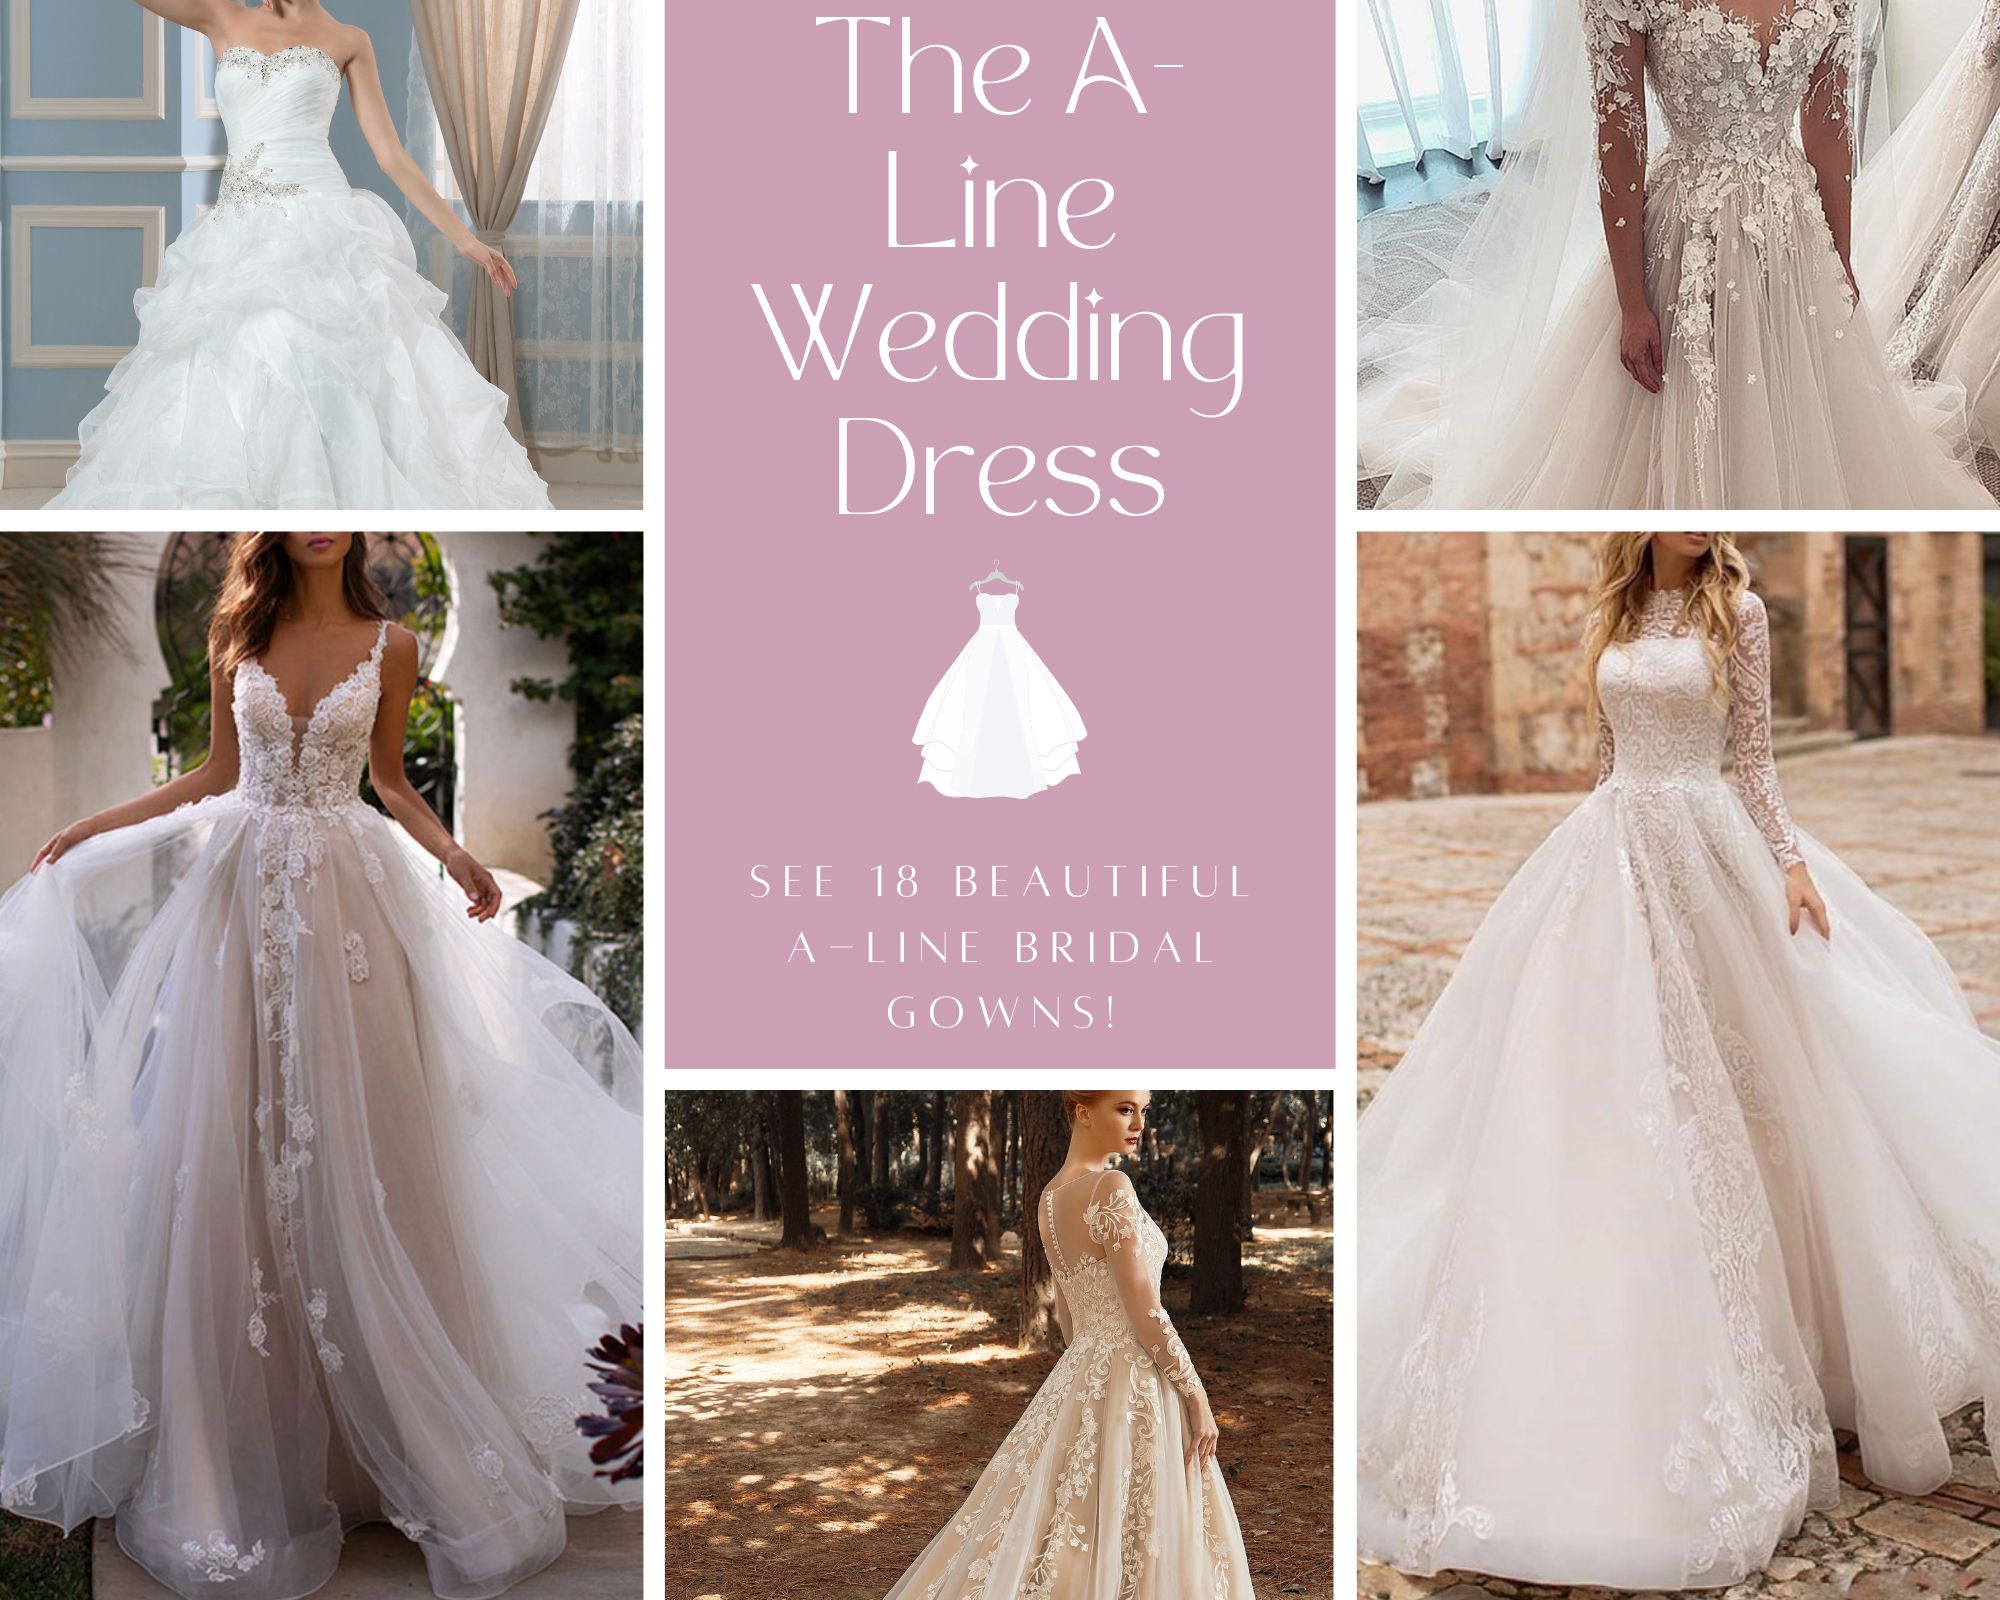 Find The Perfect A Line Wedding Dress For You